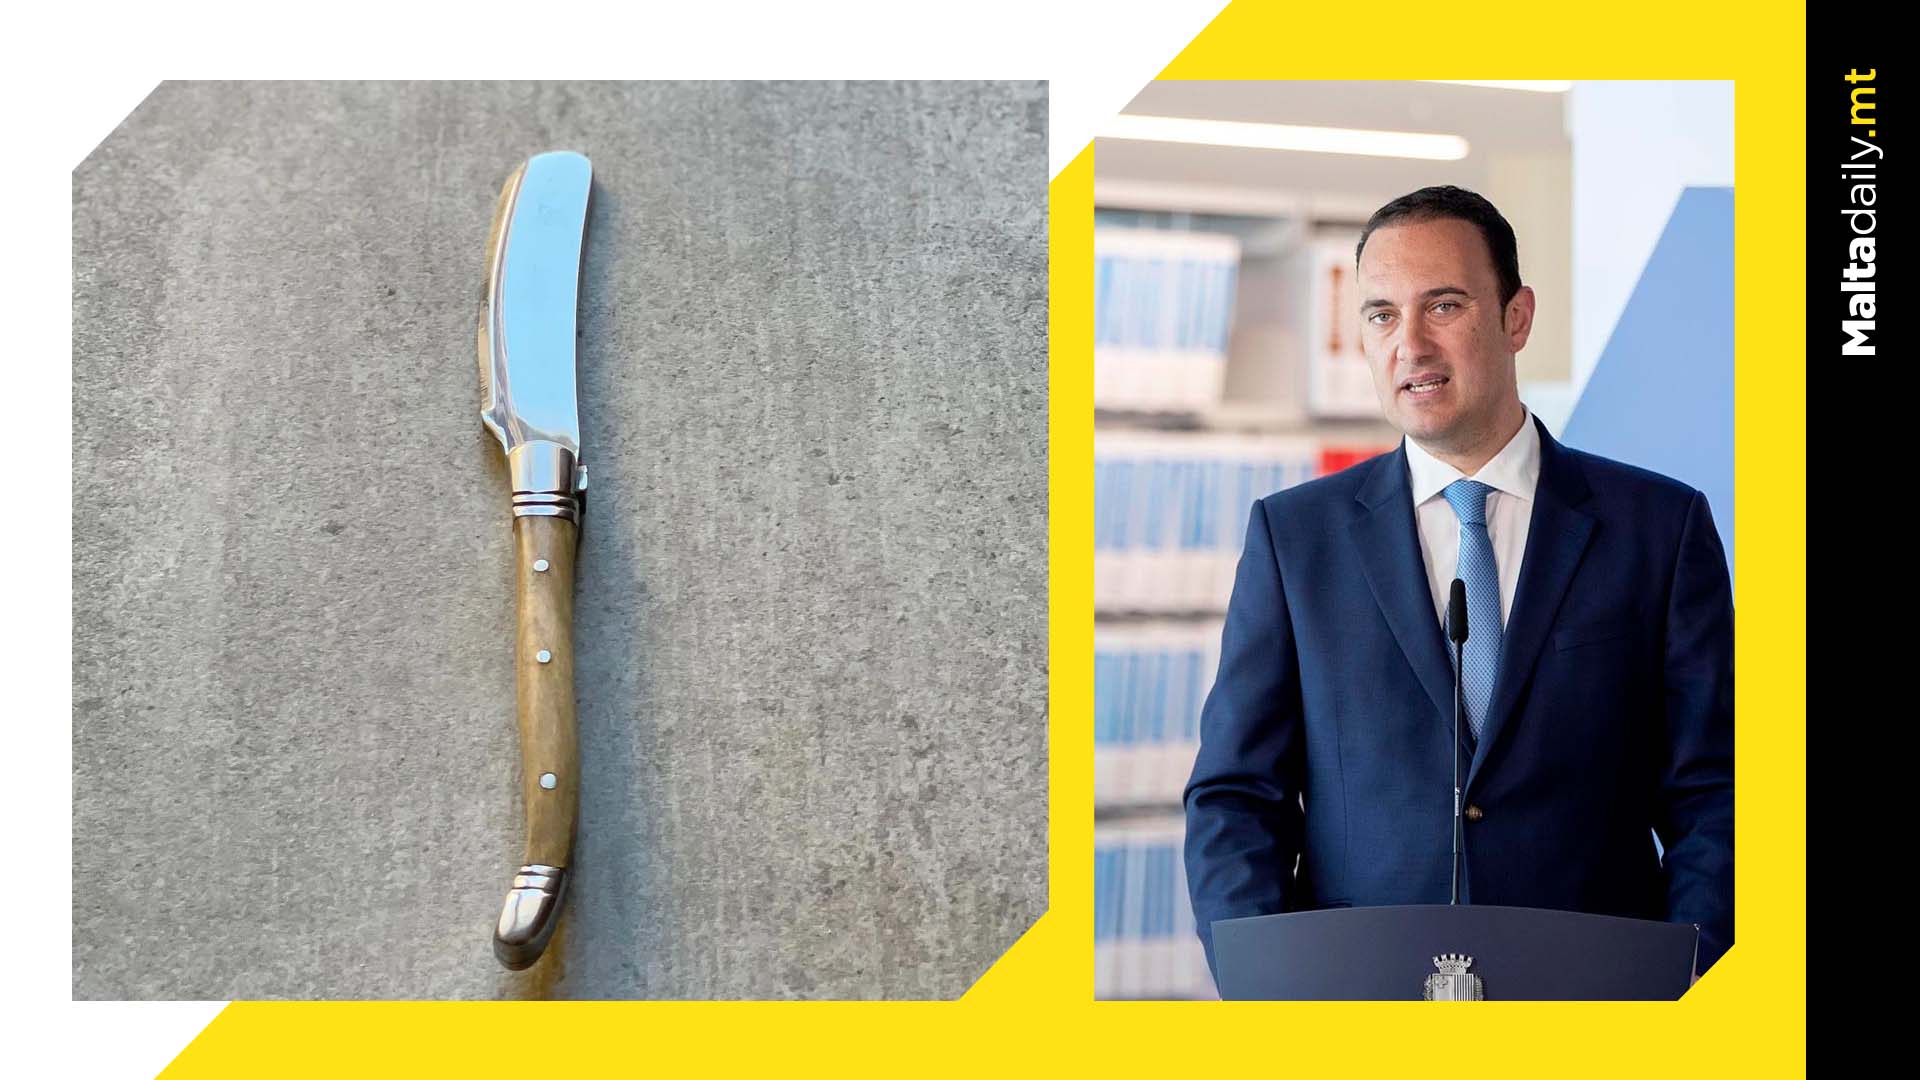 Education Ministry addresses butter knife case and alarm